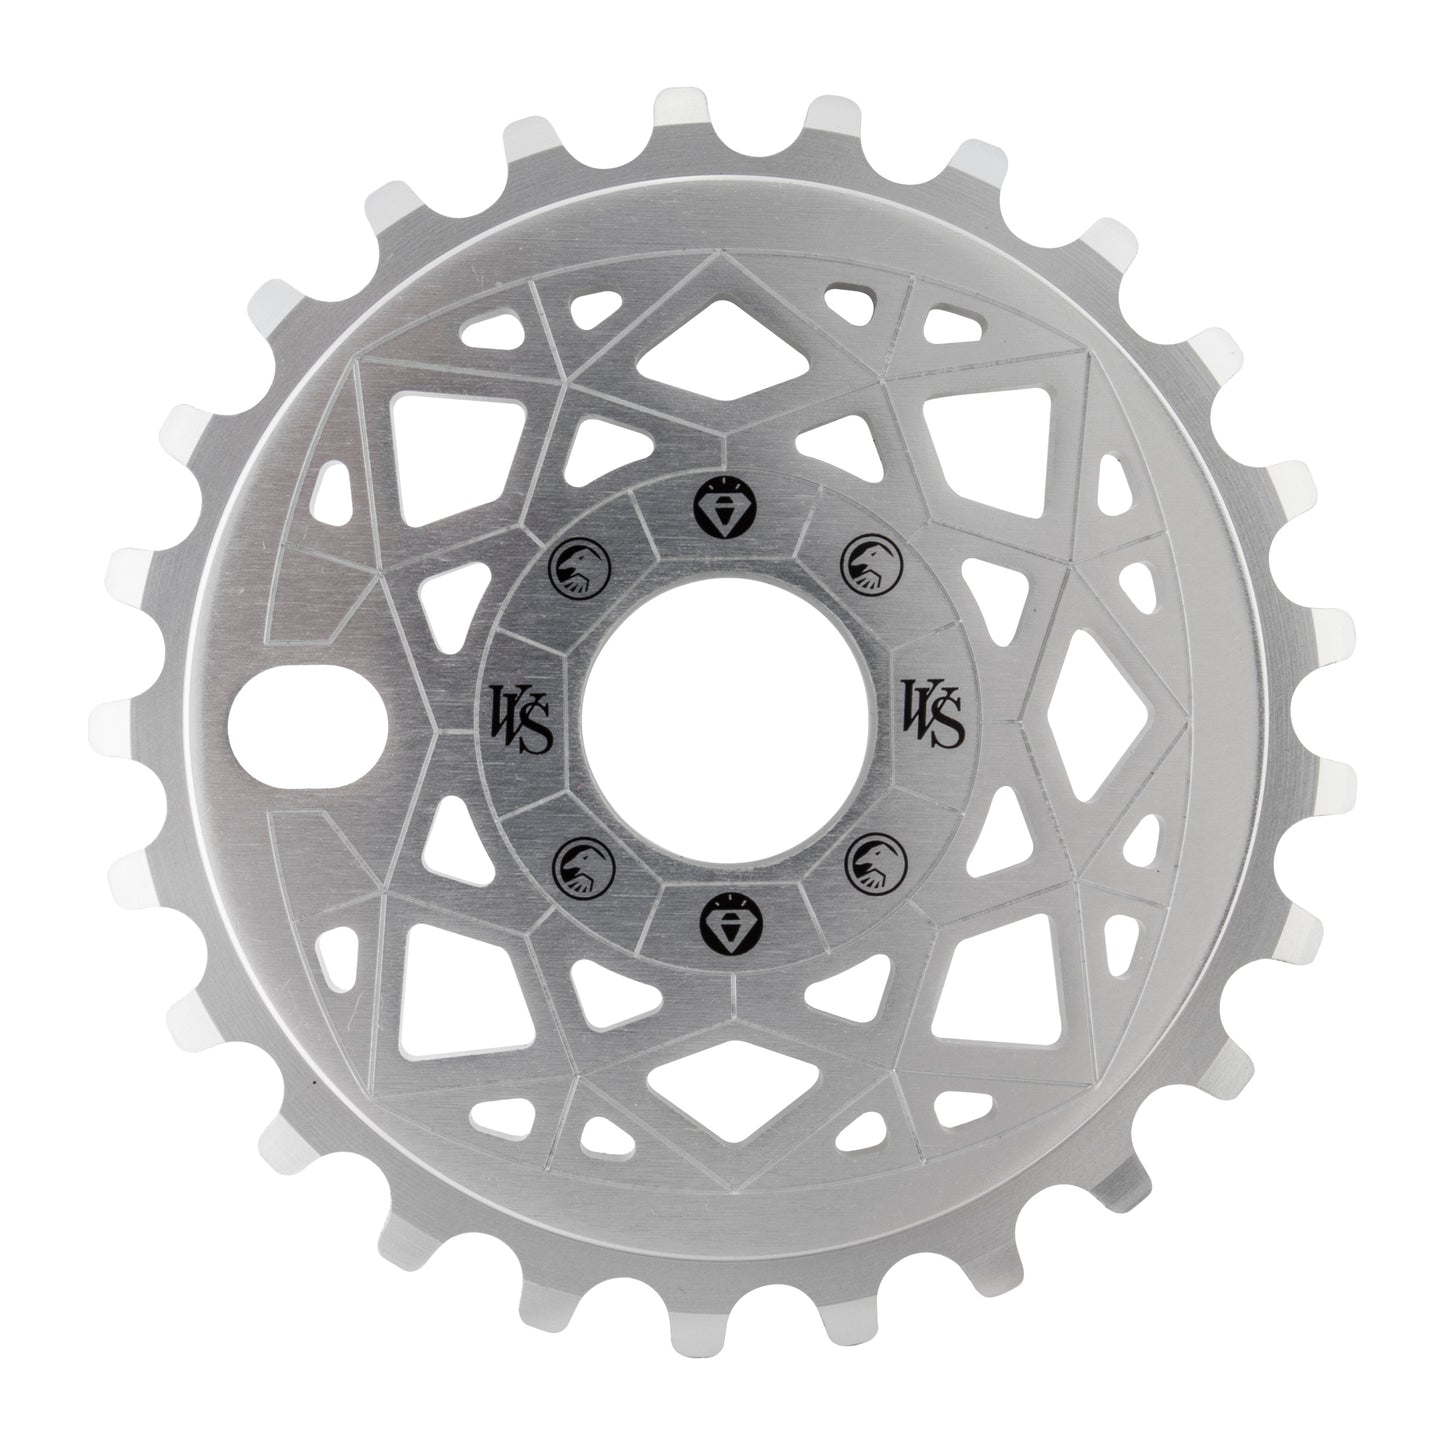 The Shadow Conspiracy Chainring Sprocket VVS